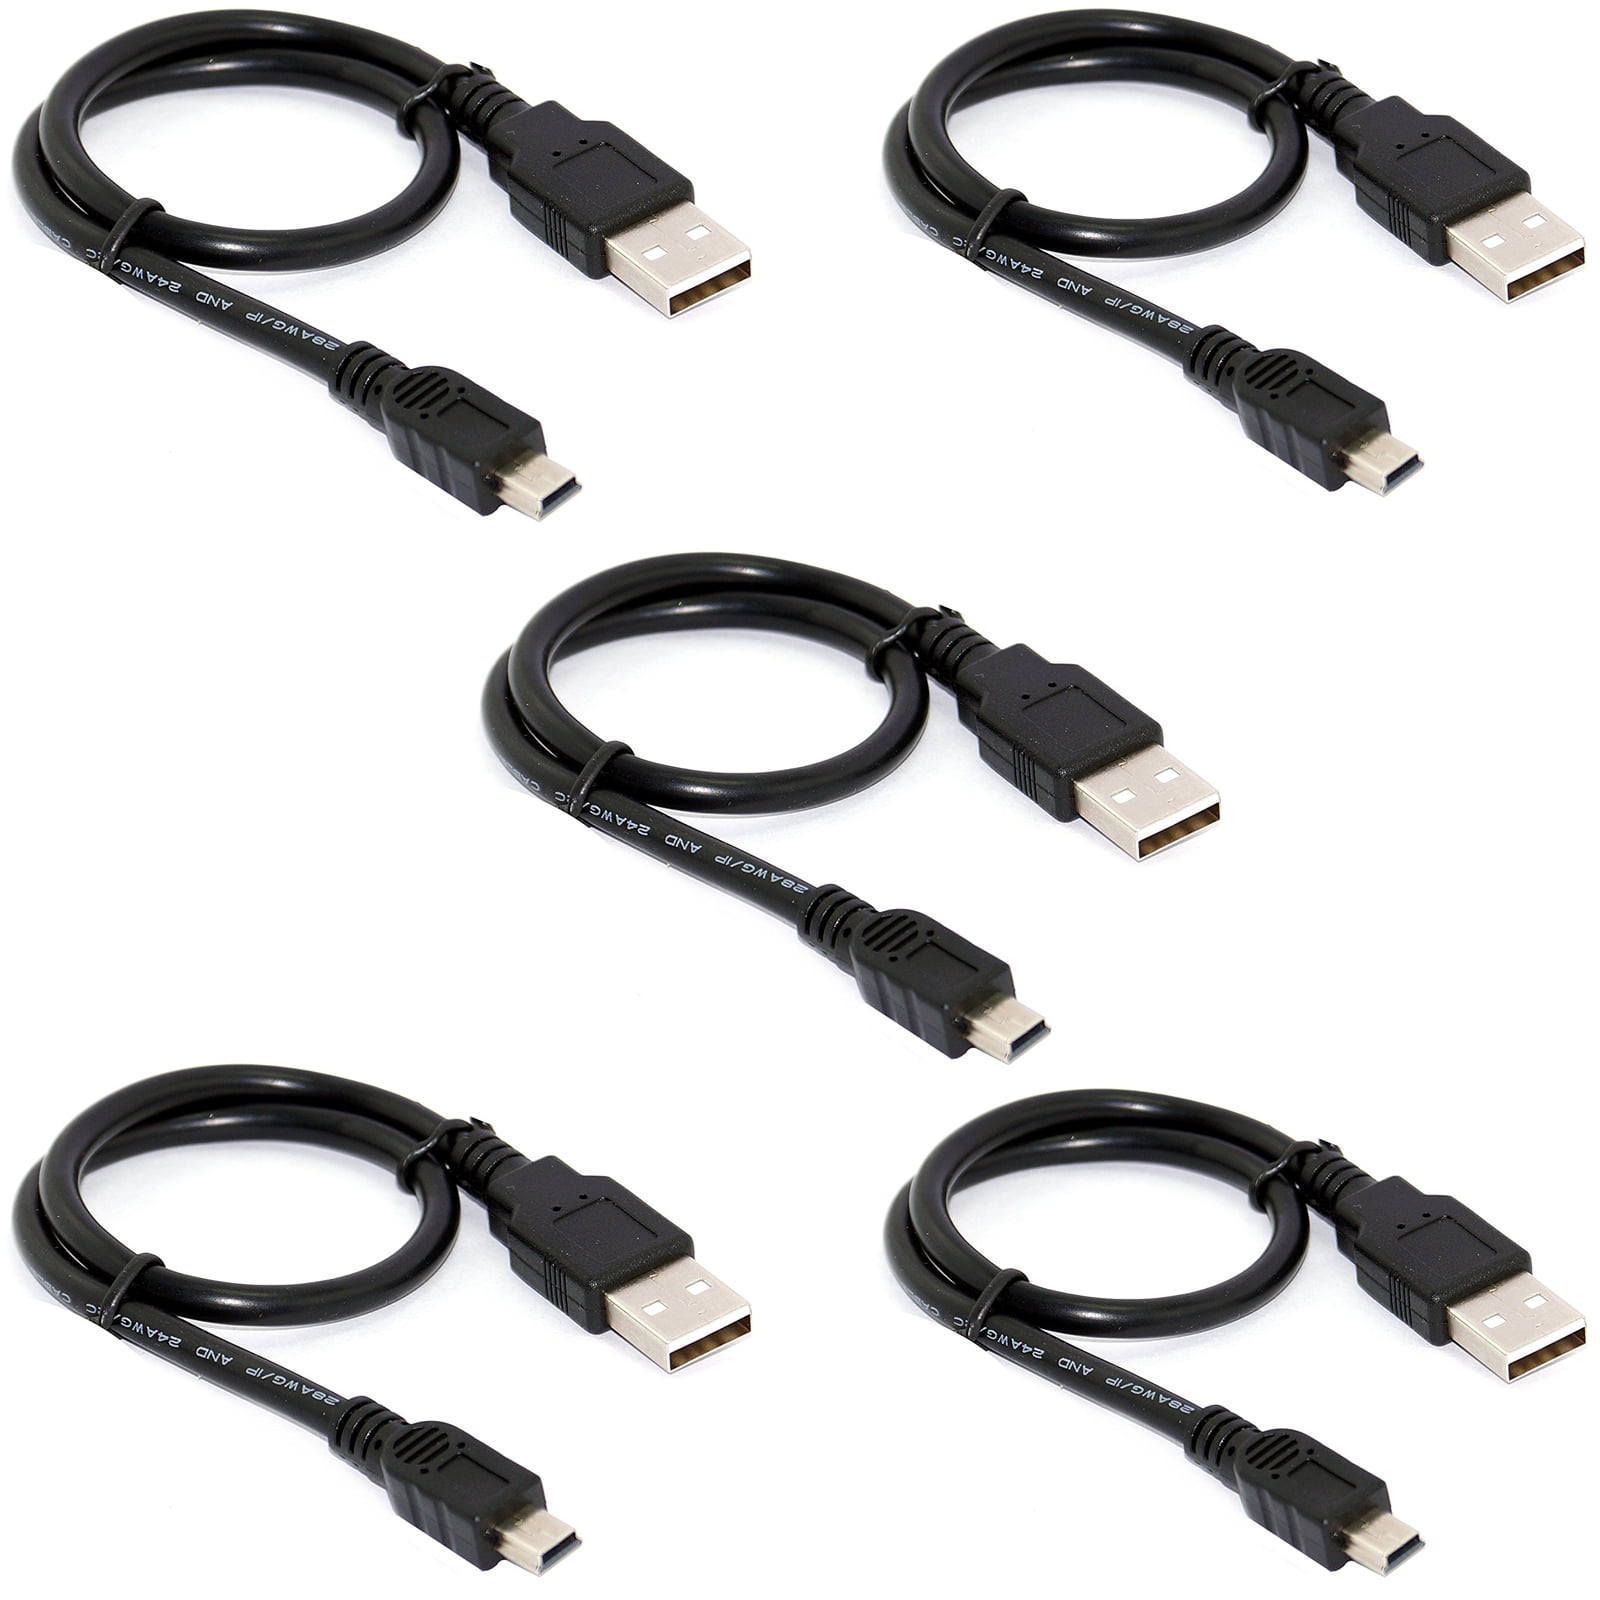 Freedomtech Mini Usb Cable 5 Pack 3ft Usb 2 0 Type A To Mini B